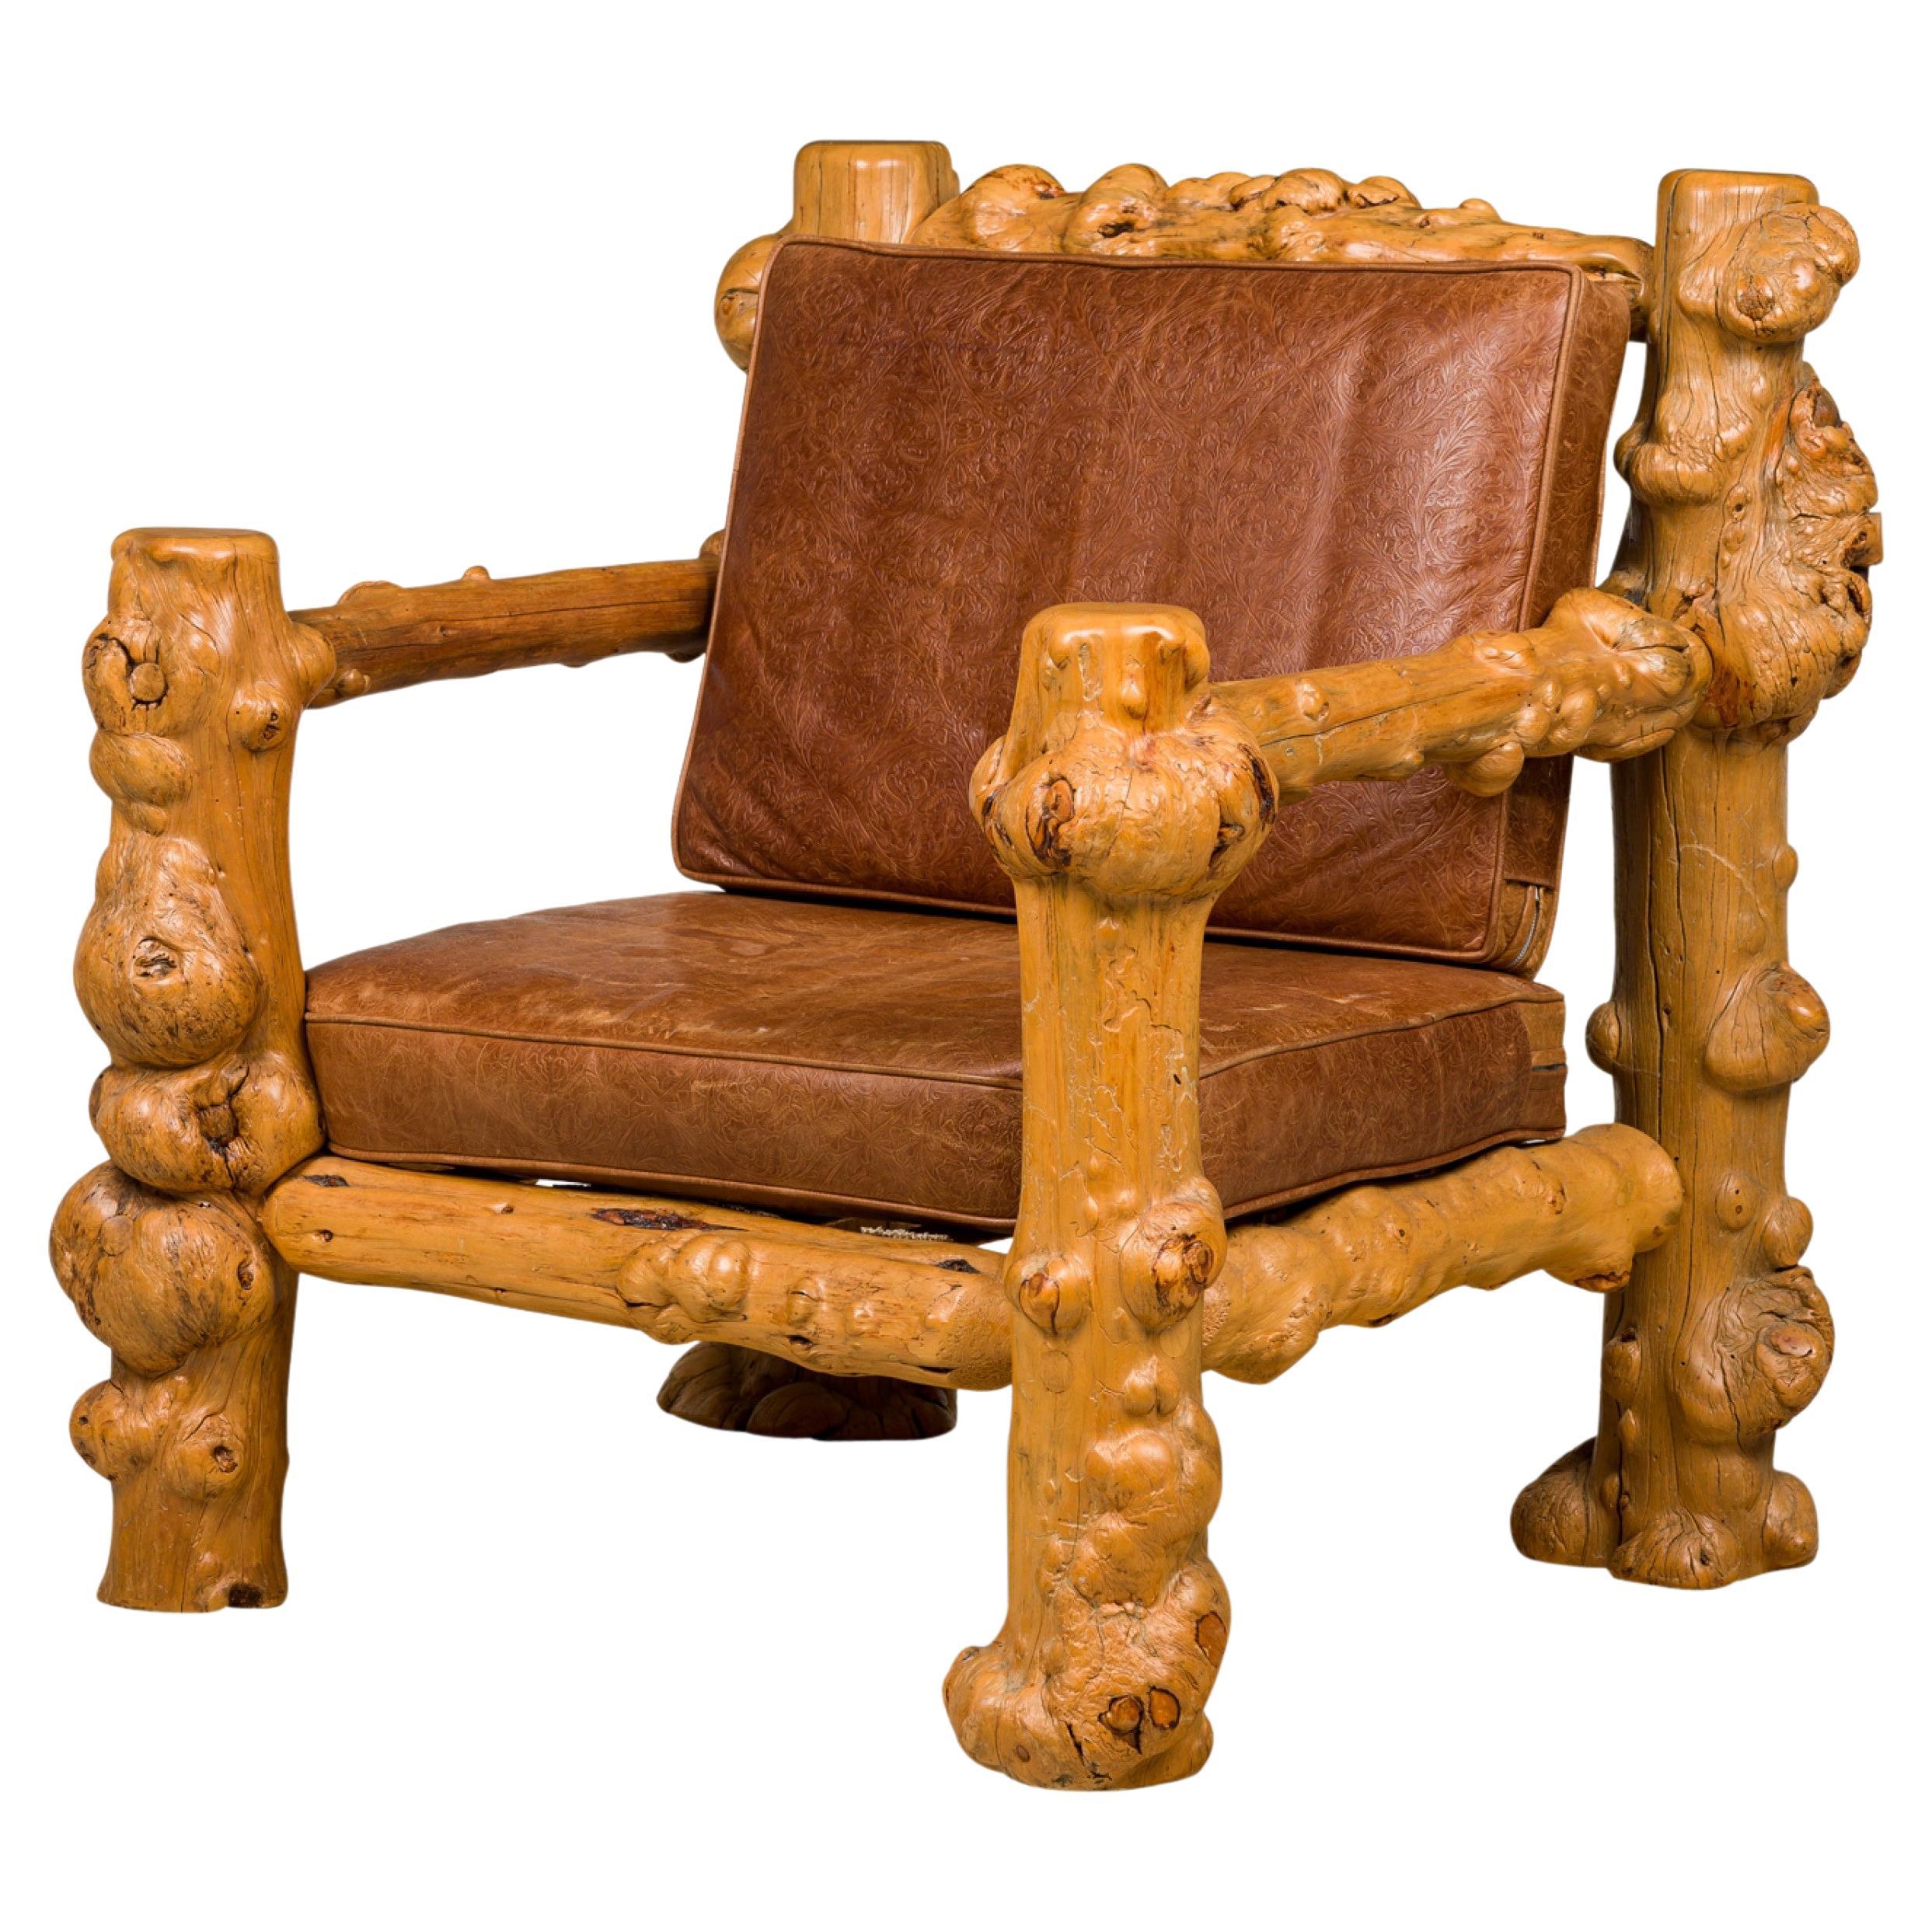 Rustic Blond Root Wood and Embossed Leather Throne Armchair